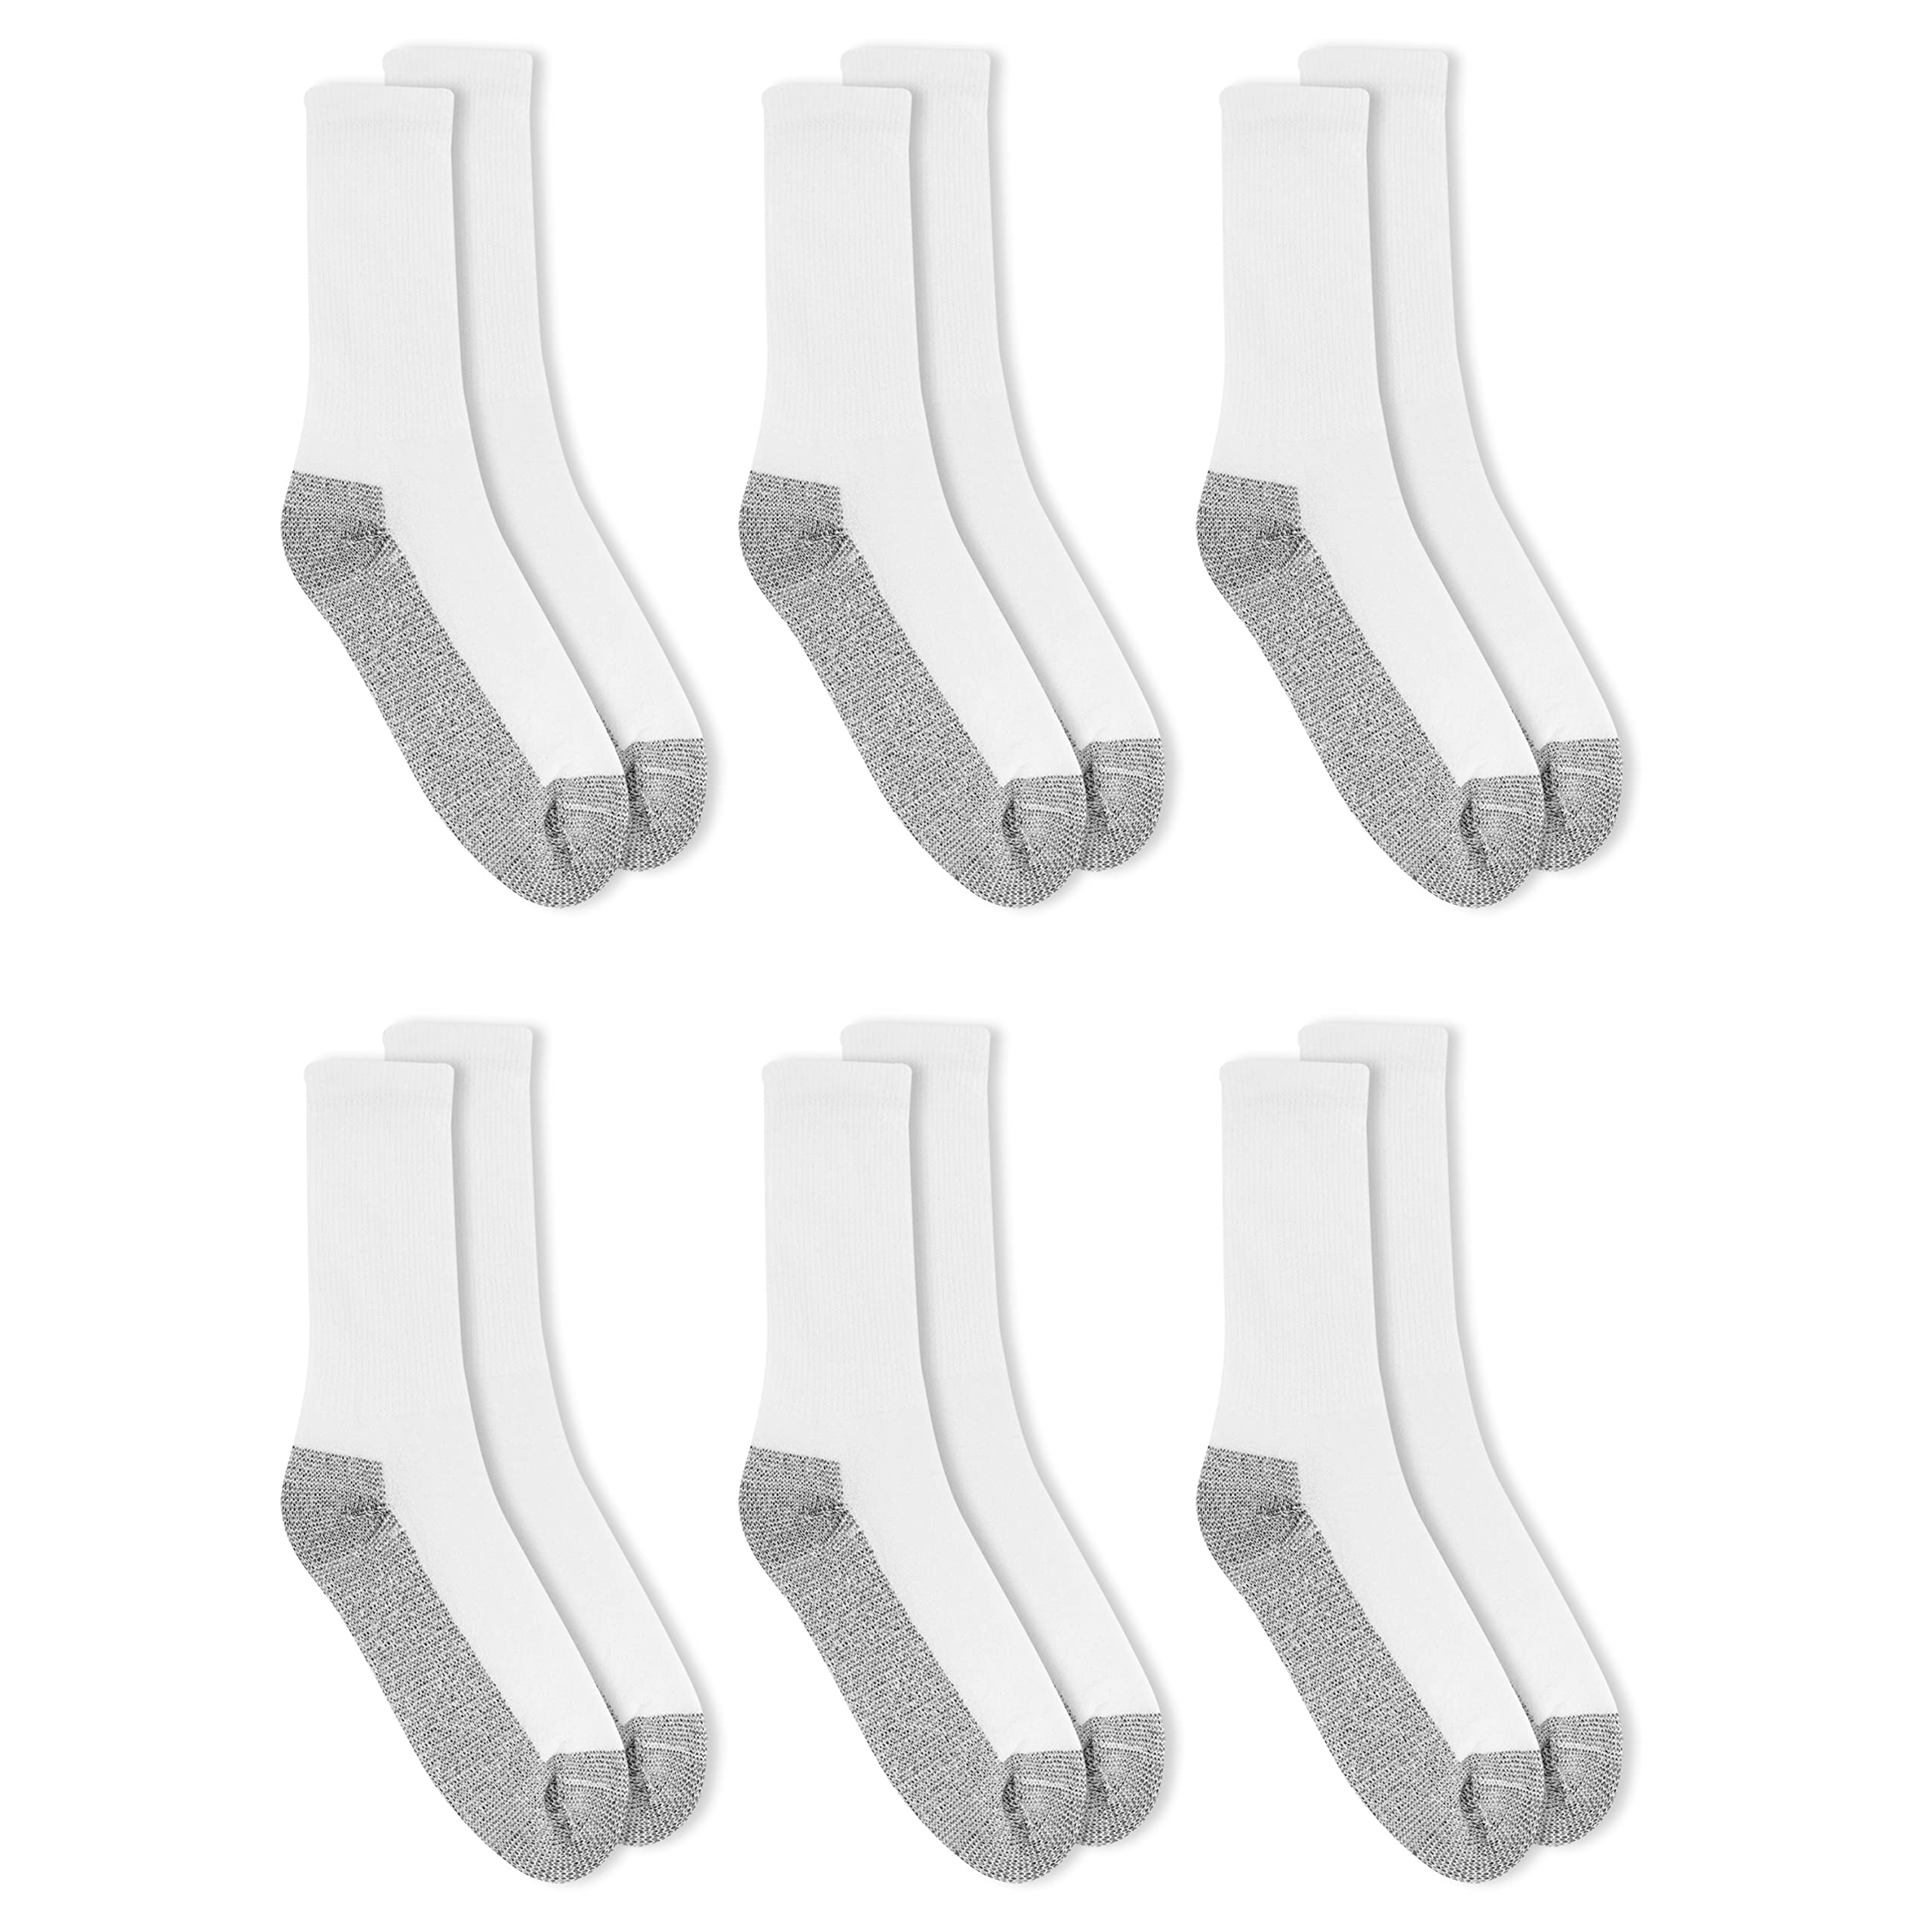 Fruit of the Loom Men's Big and Tall 6 Pack Heavy Duty Reinforced Cushion Full Crew Socks, White Shoe Size: 13-15